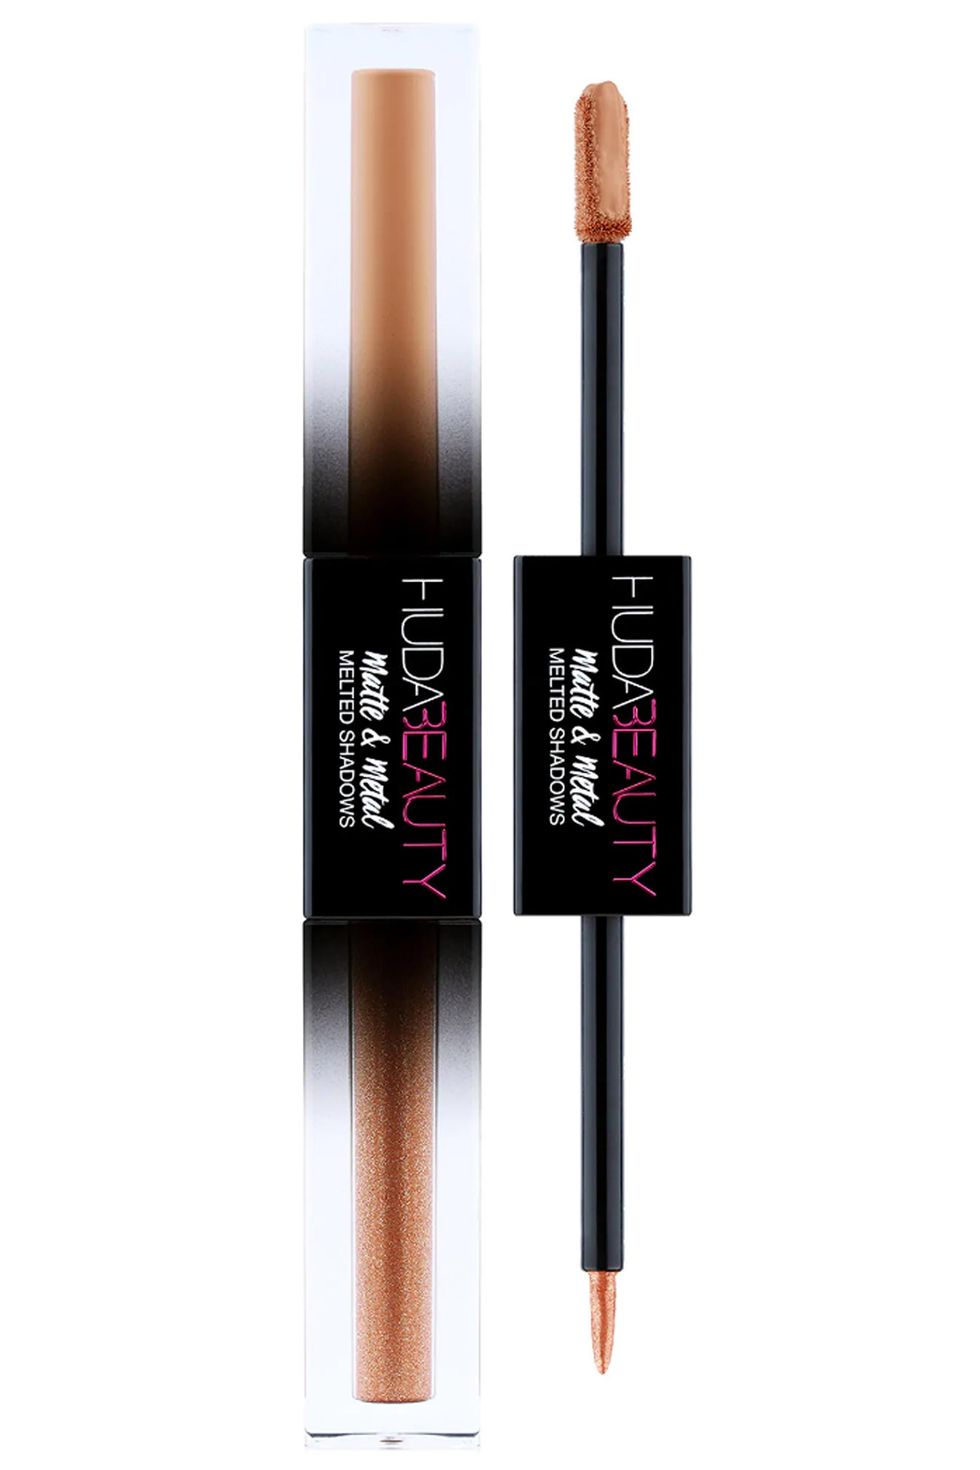 Huda Beauty Matte & Metal Melted Double Ended Eyeshadows